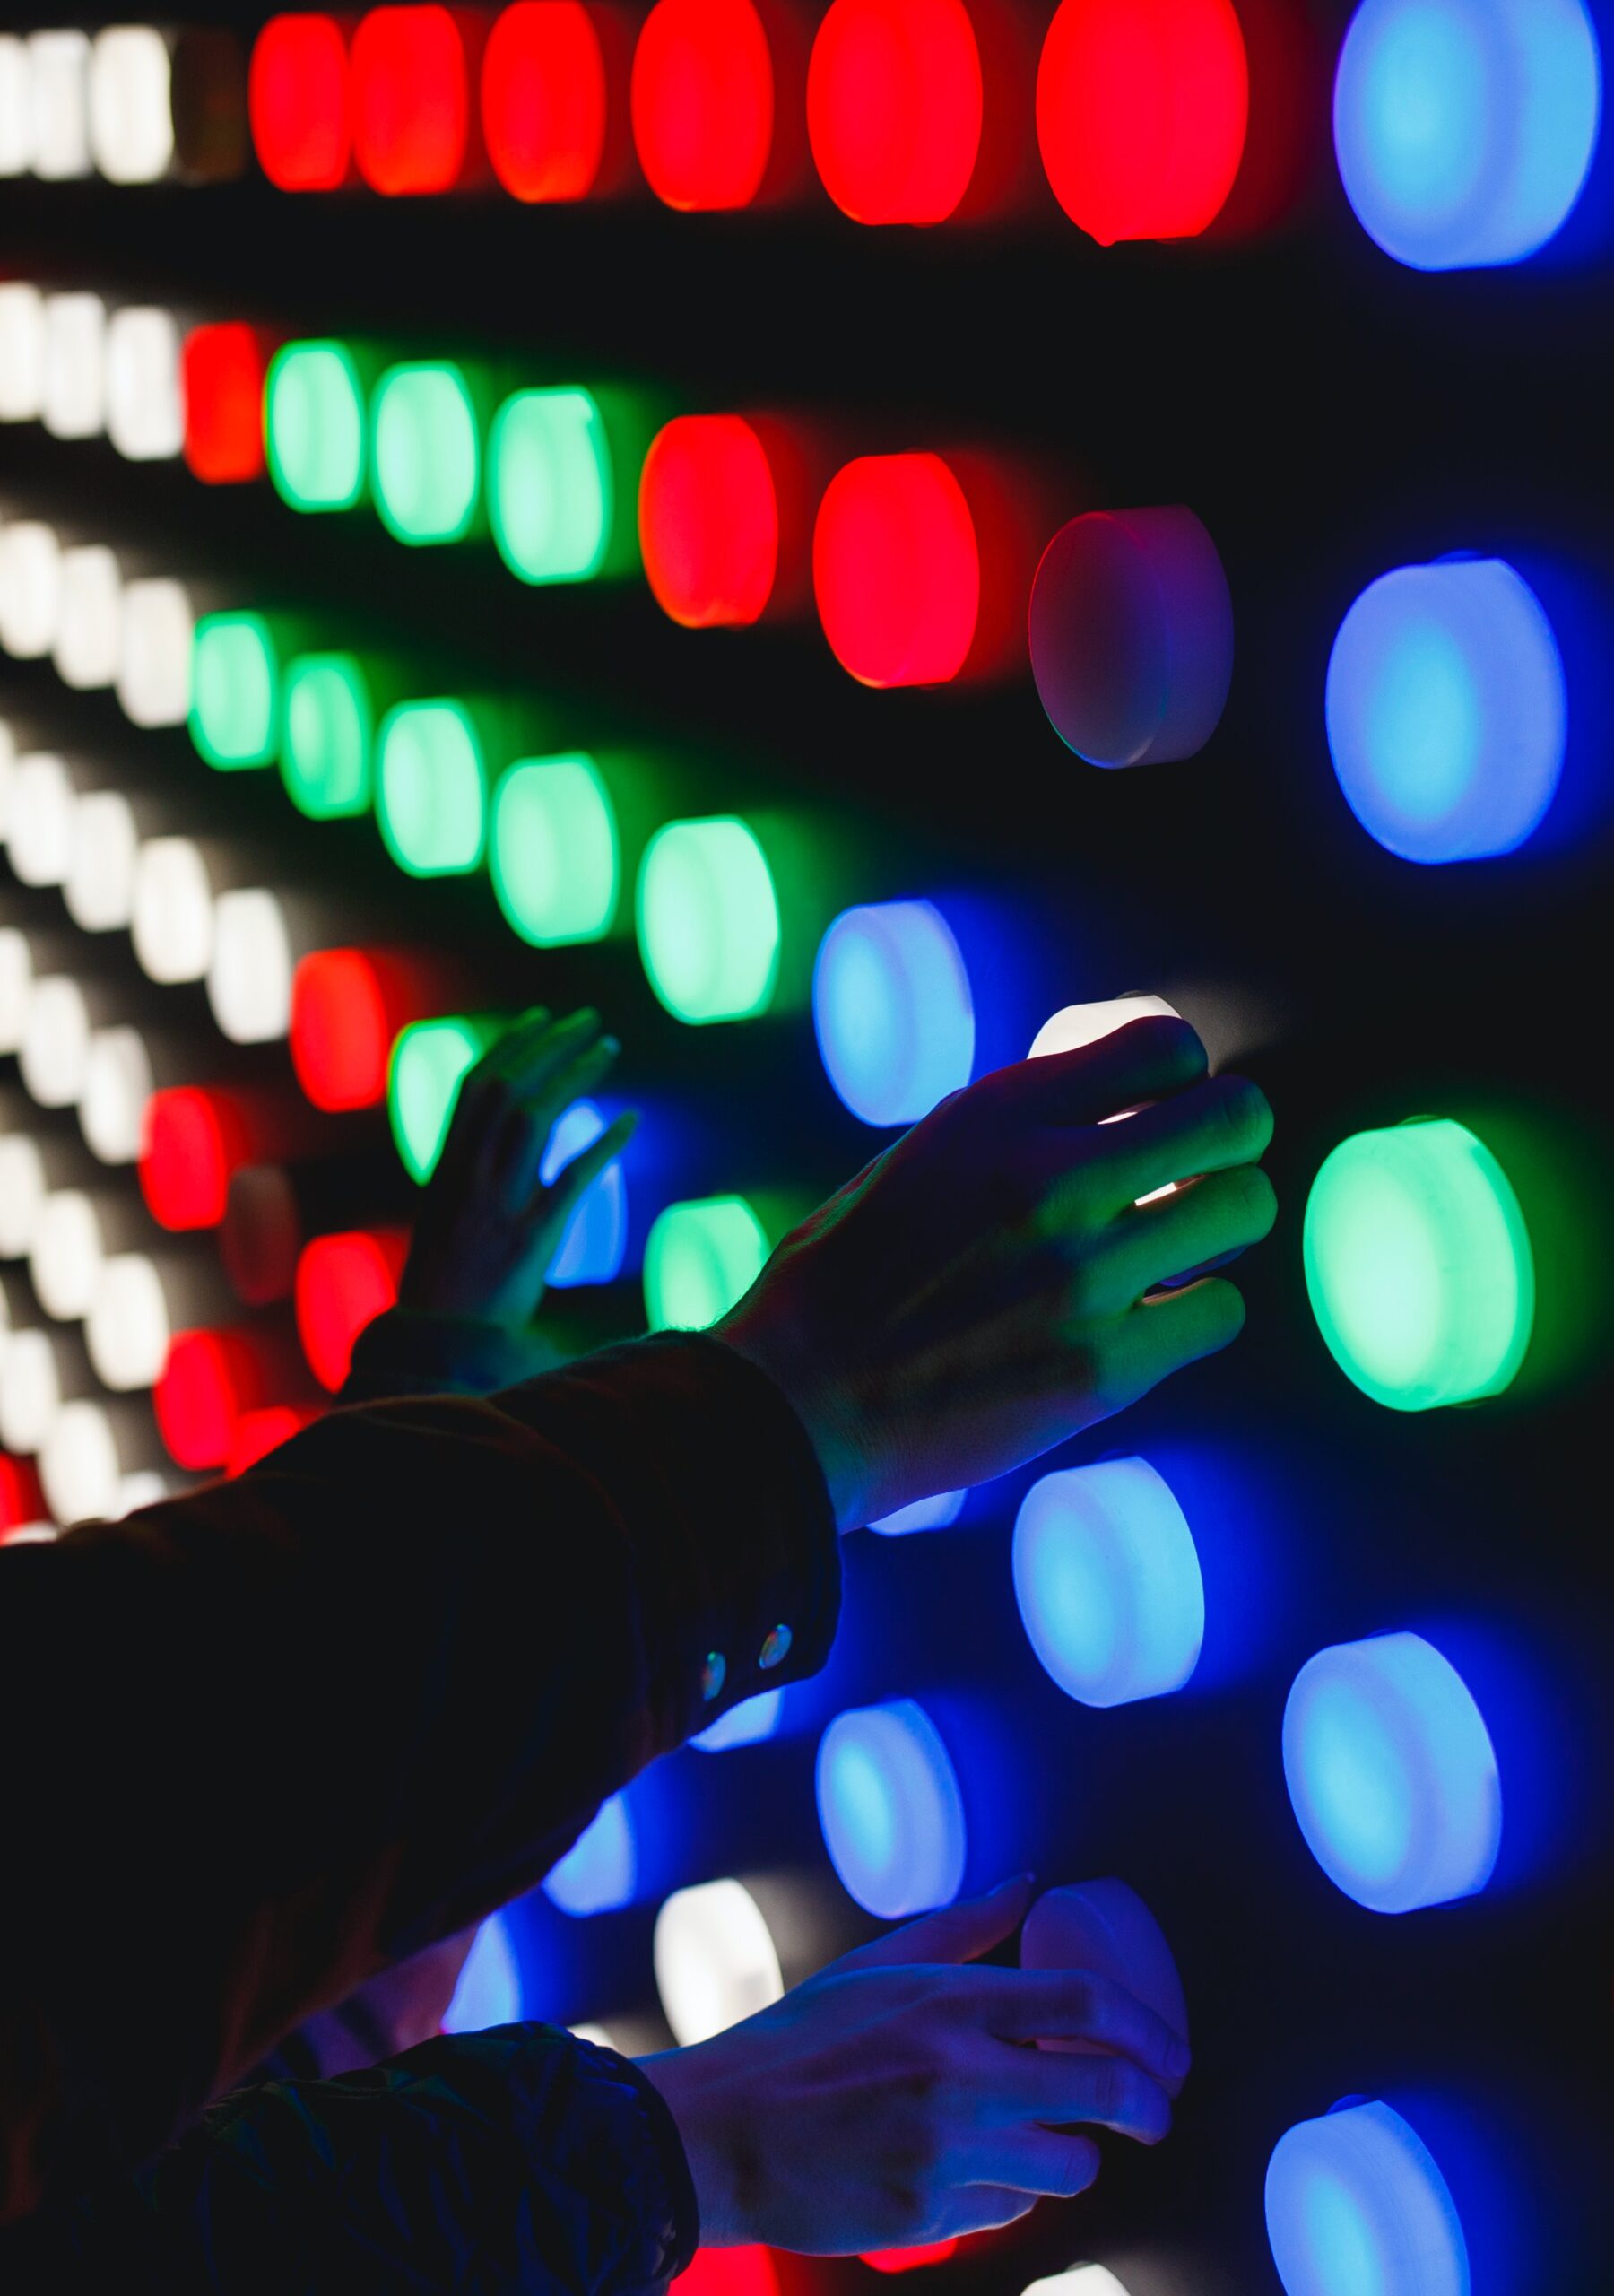 A dark wall of lit up colored buttons. To the far left, the buttons are white, and towards the right, they become red, green, and blue. A few hands reach out to touch the buttons.